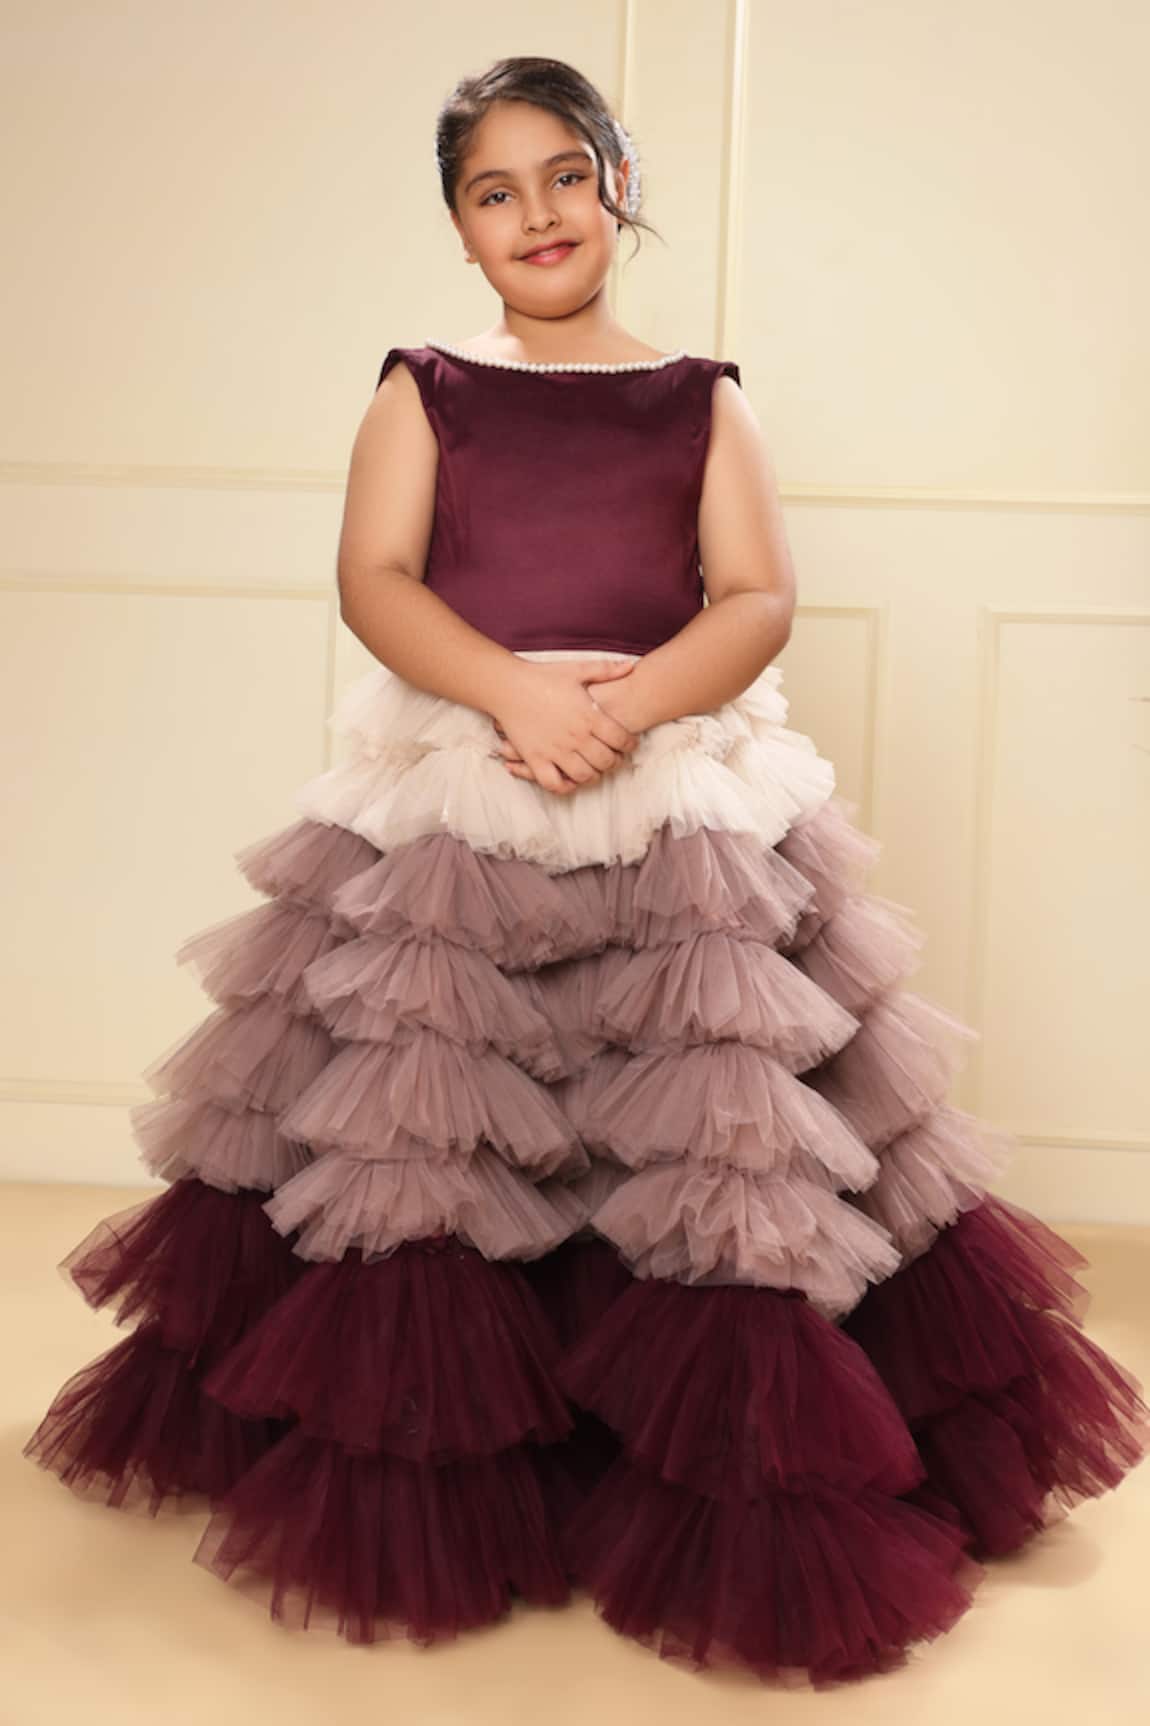 Dropship Baby Girl Solid Color One Shoulder Design Tutu Formal Dress  Baptism Birthday Dress to Sell Online at a Lower Price | Doba